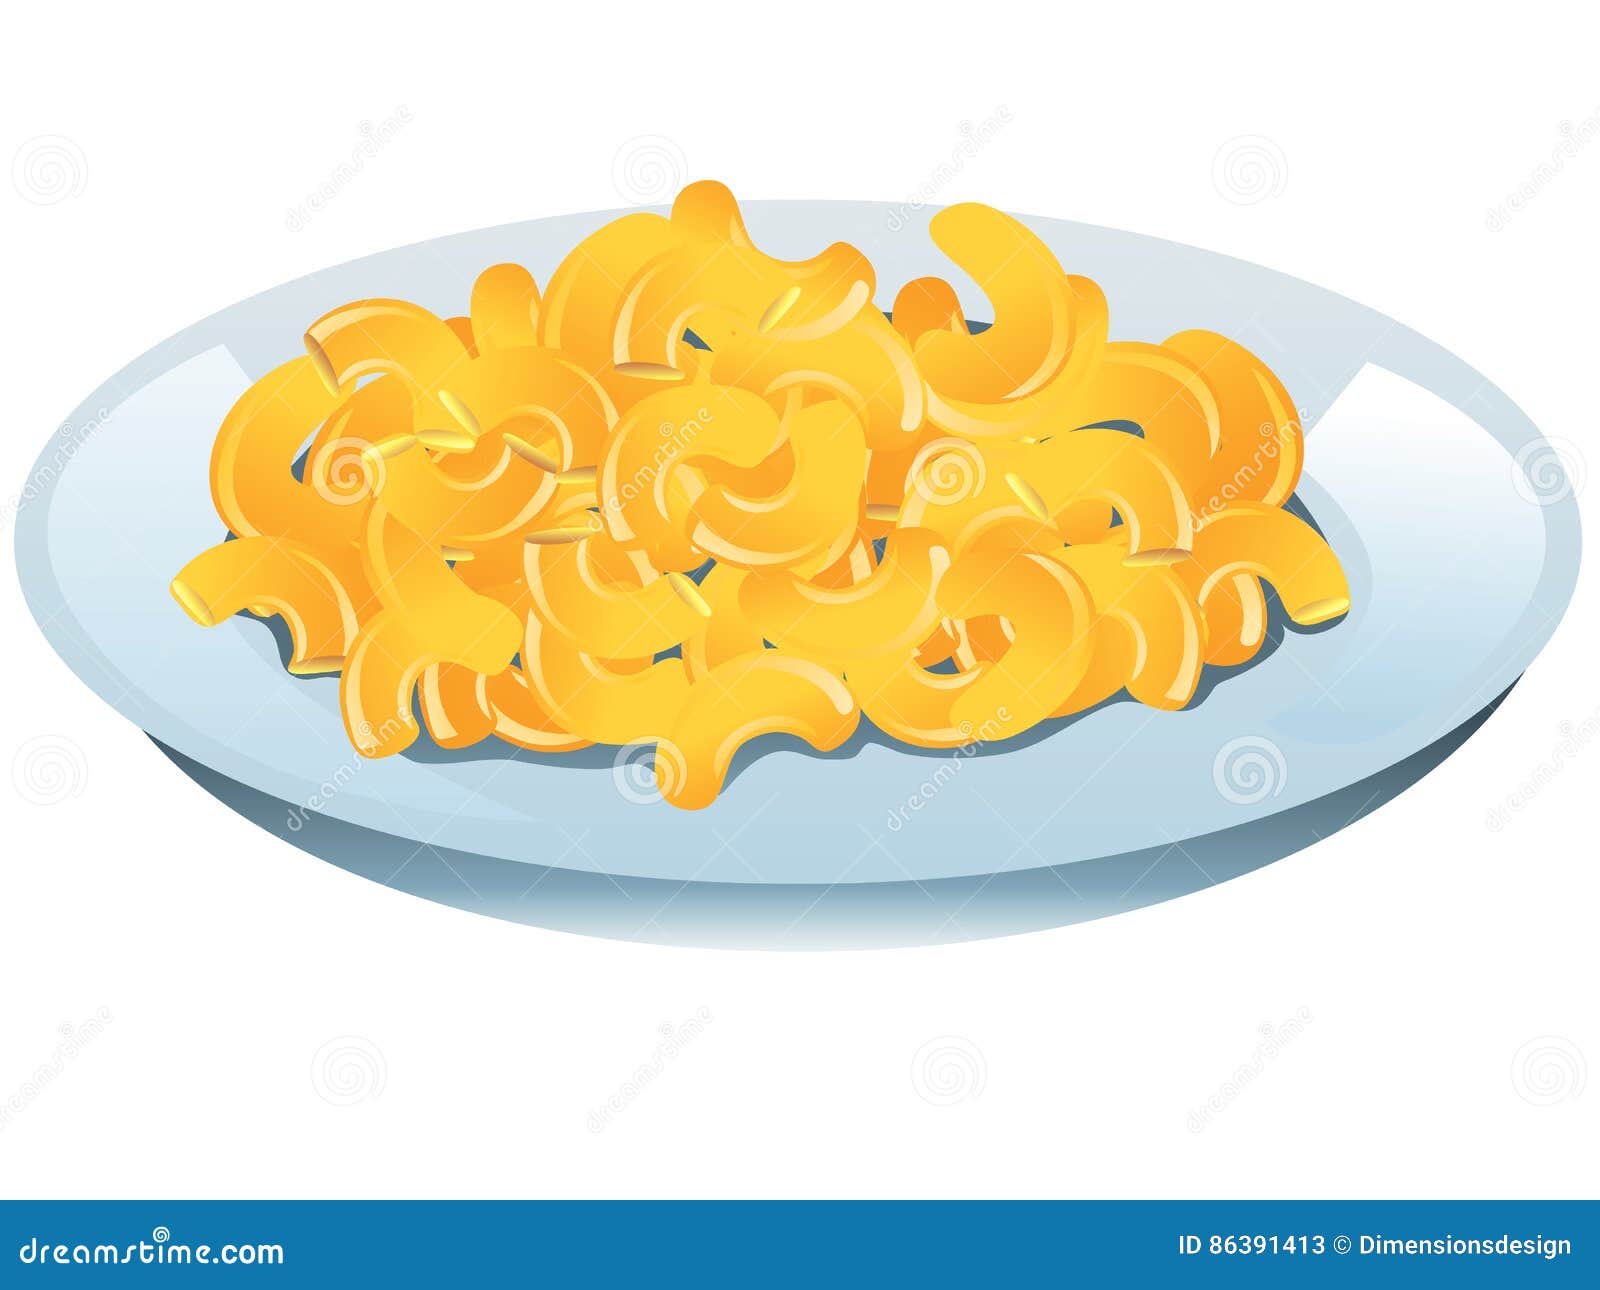 Mac and cheese stock vector. Illustration of macaroni - 86391413